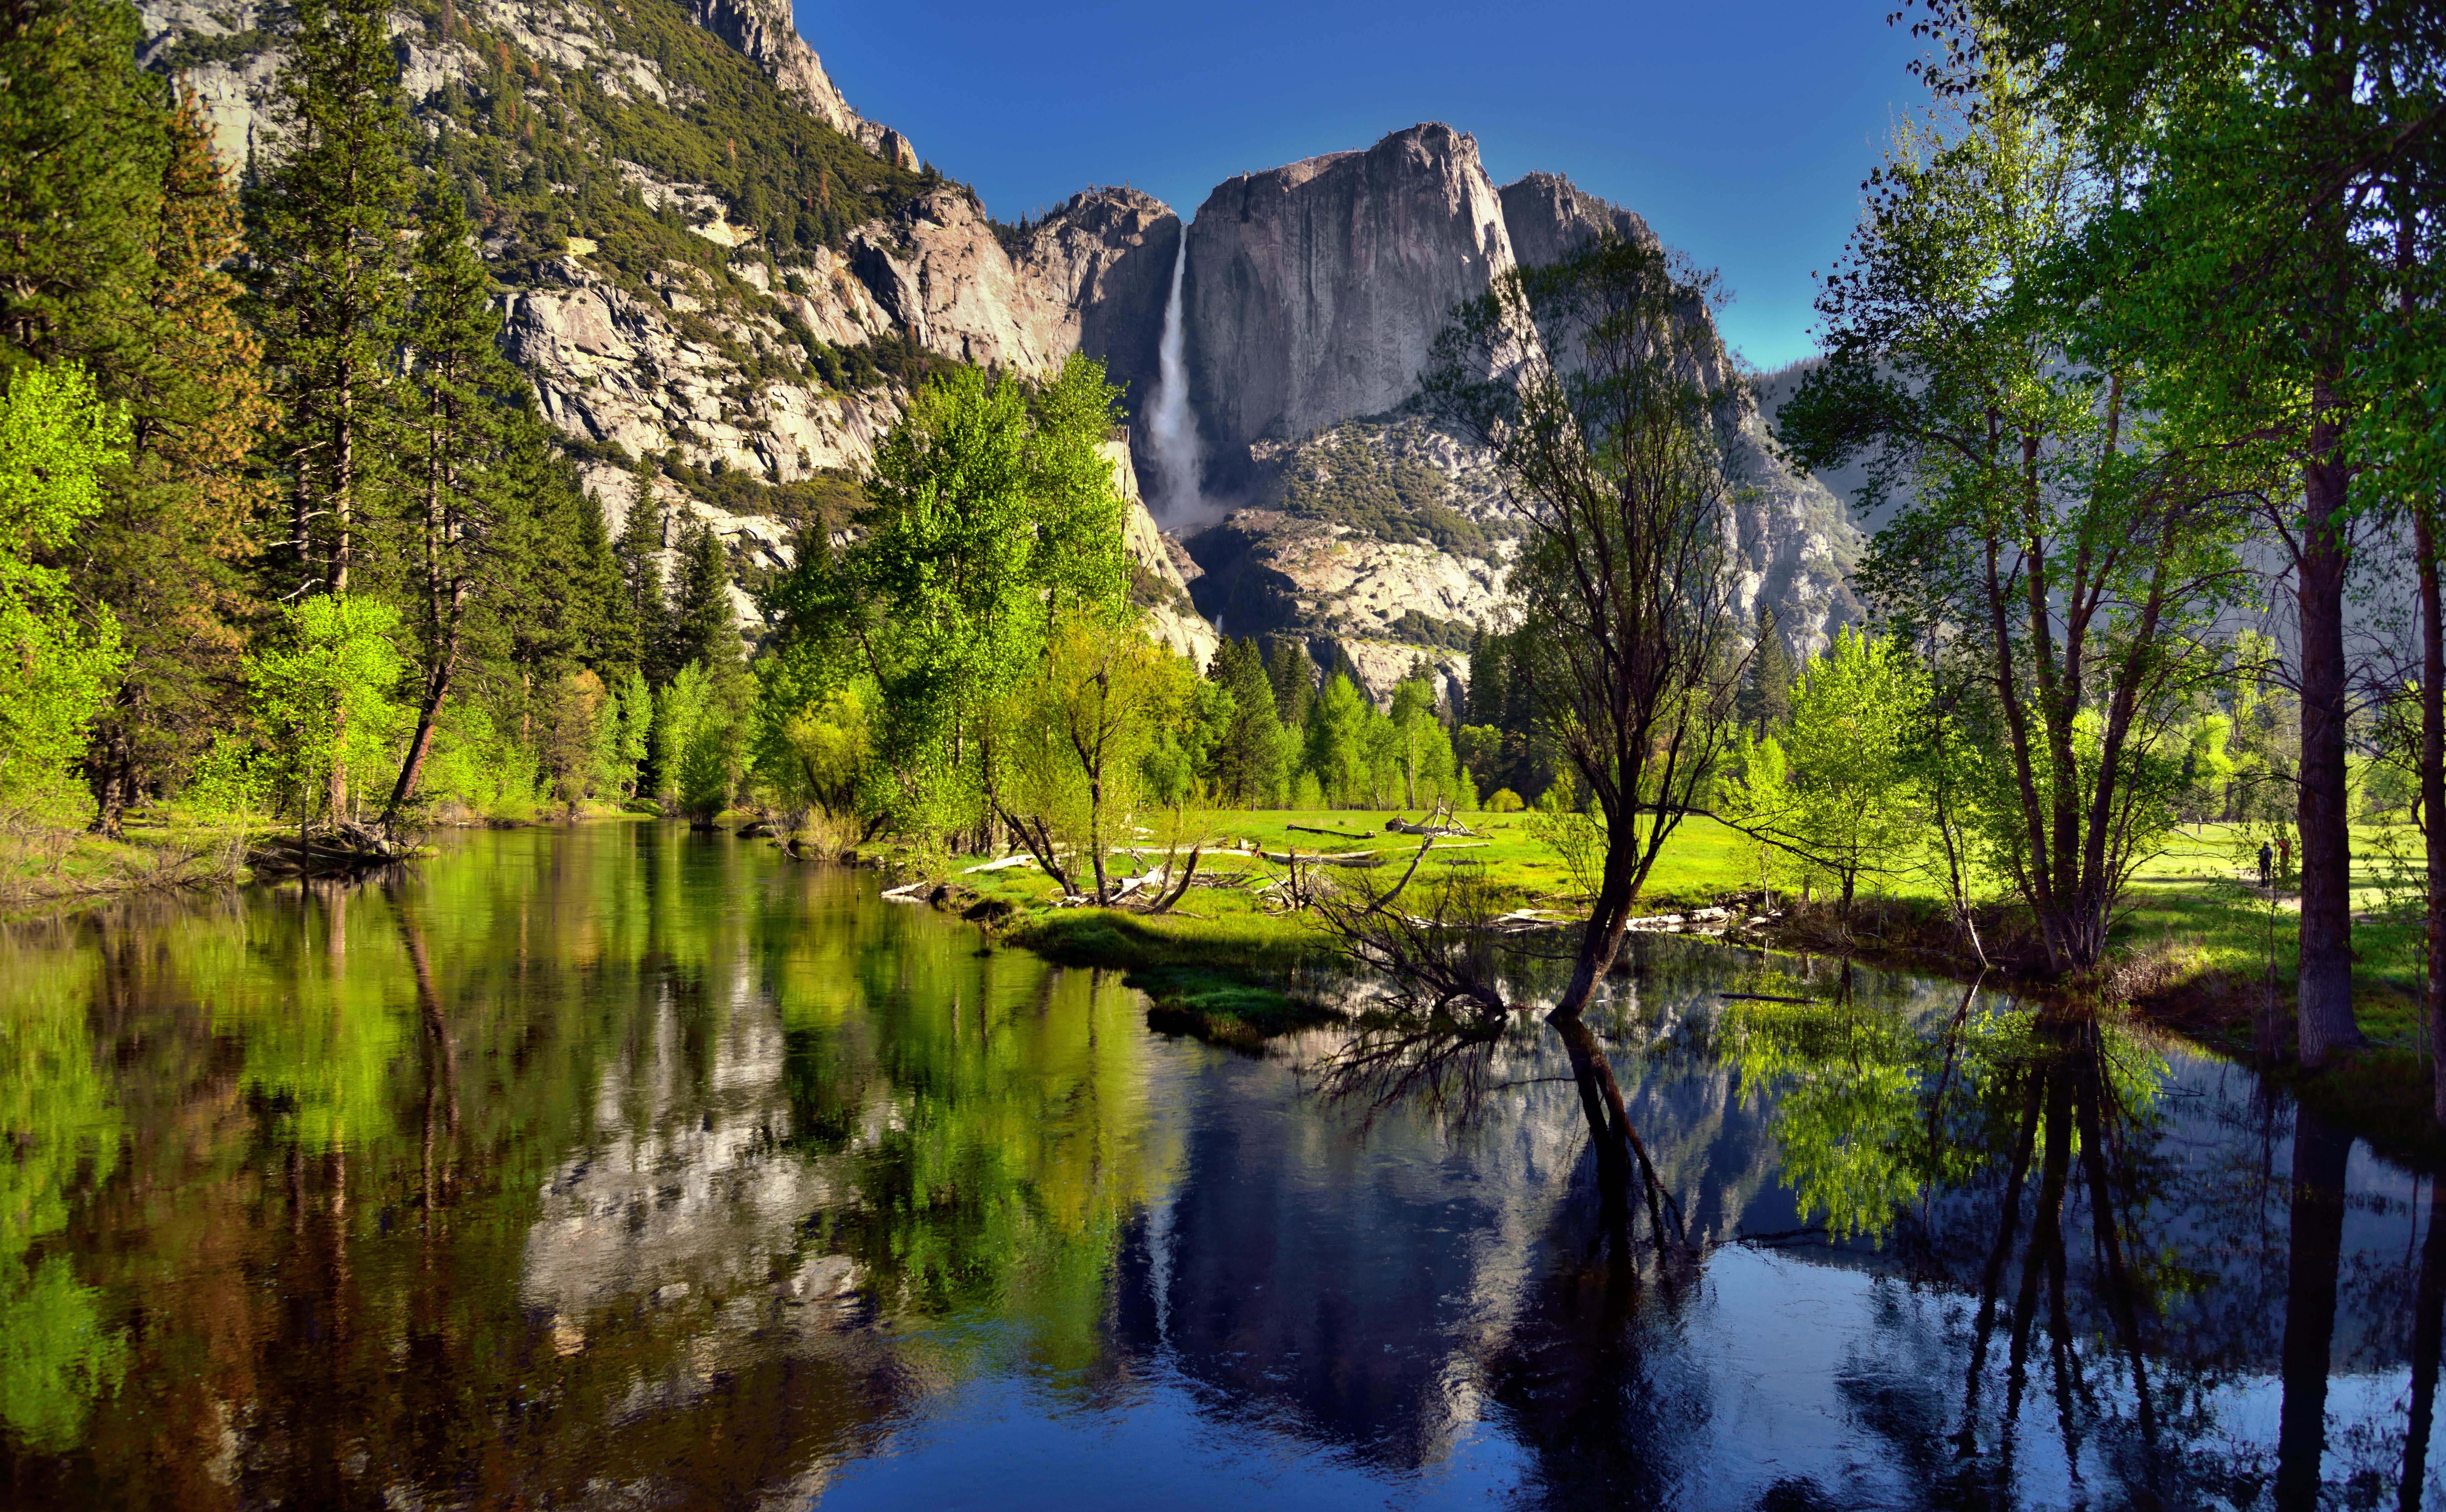 Photo Of Bodies Of Water Near Cliff Merced River Yosemite National